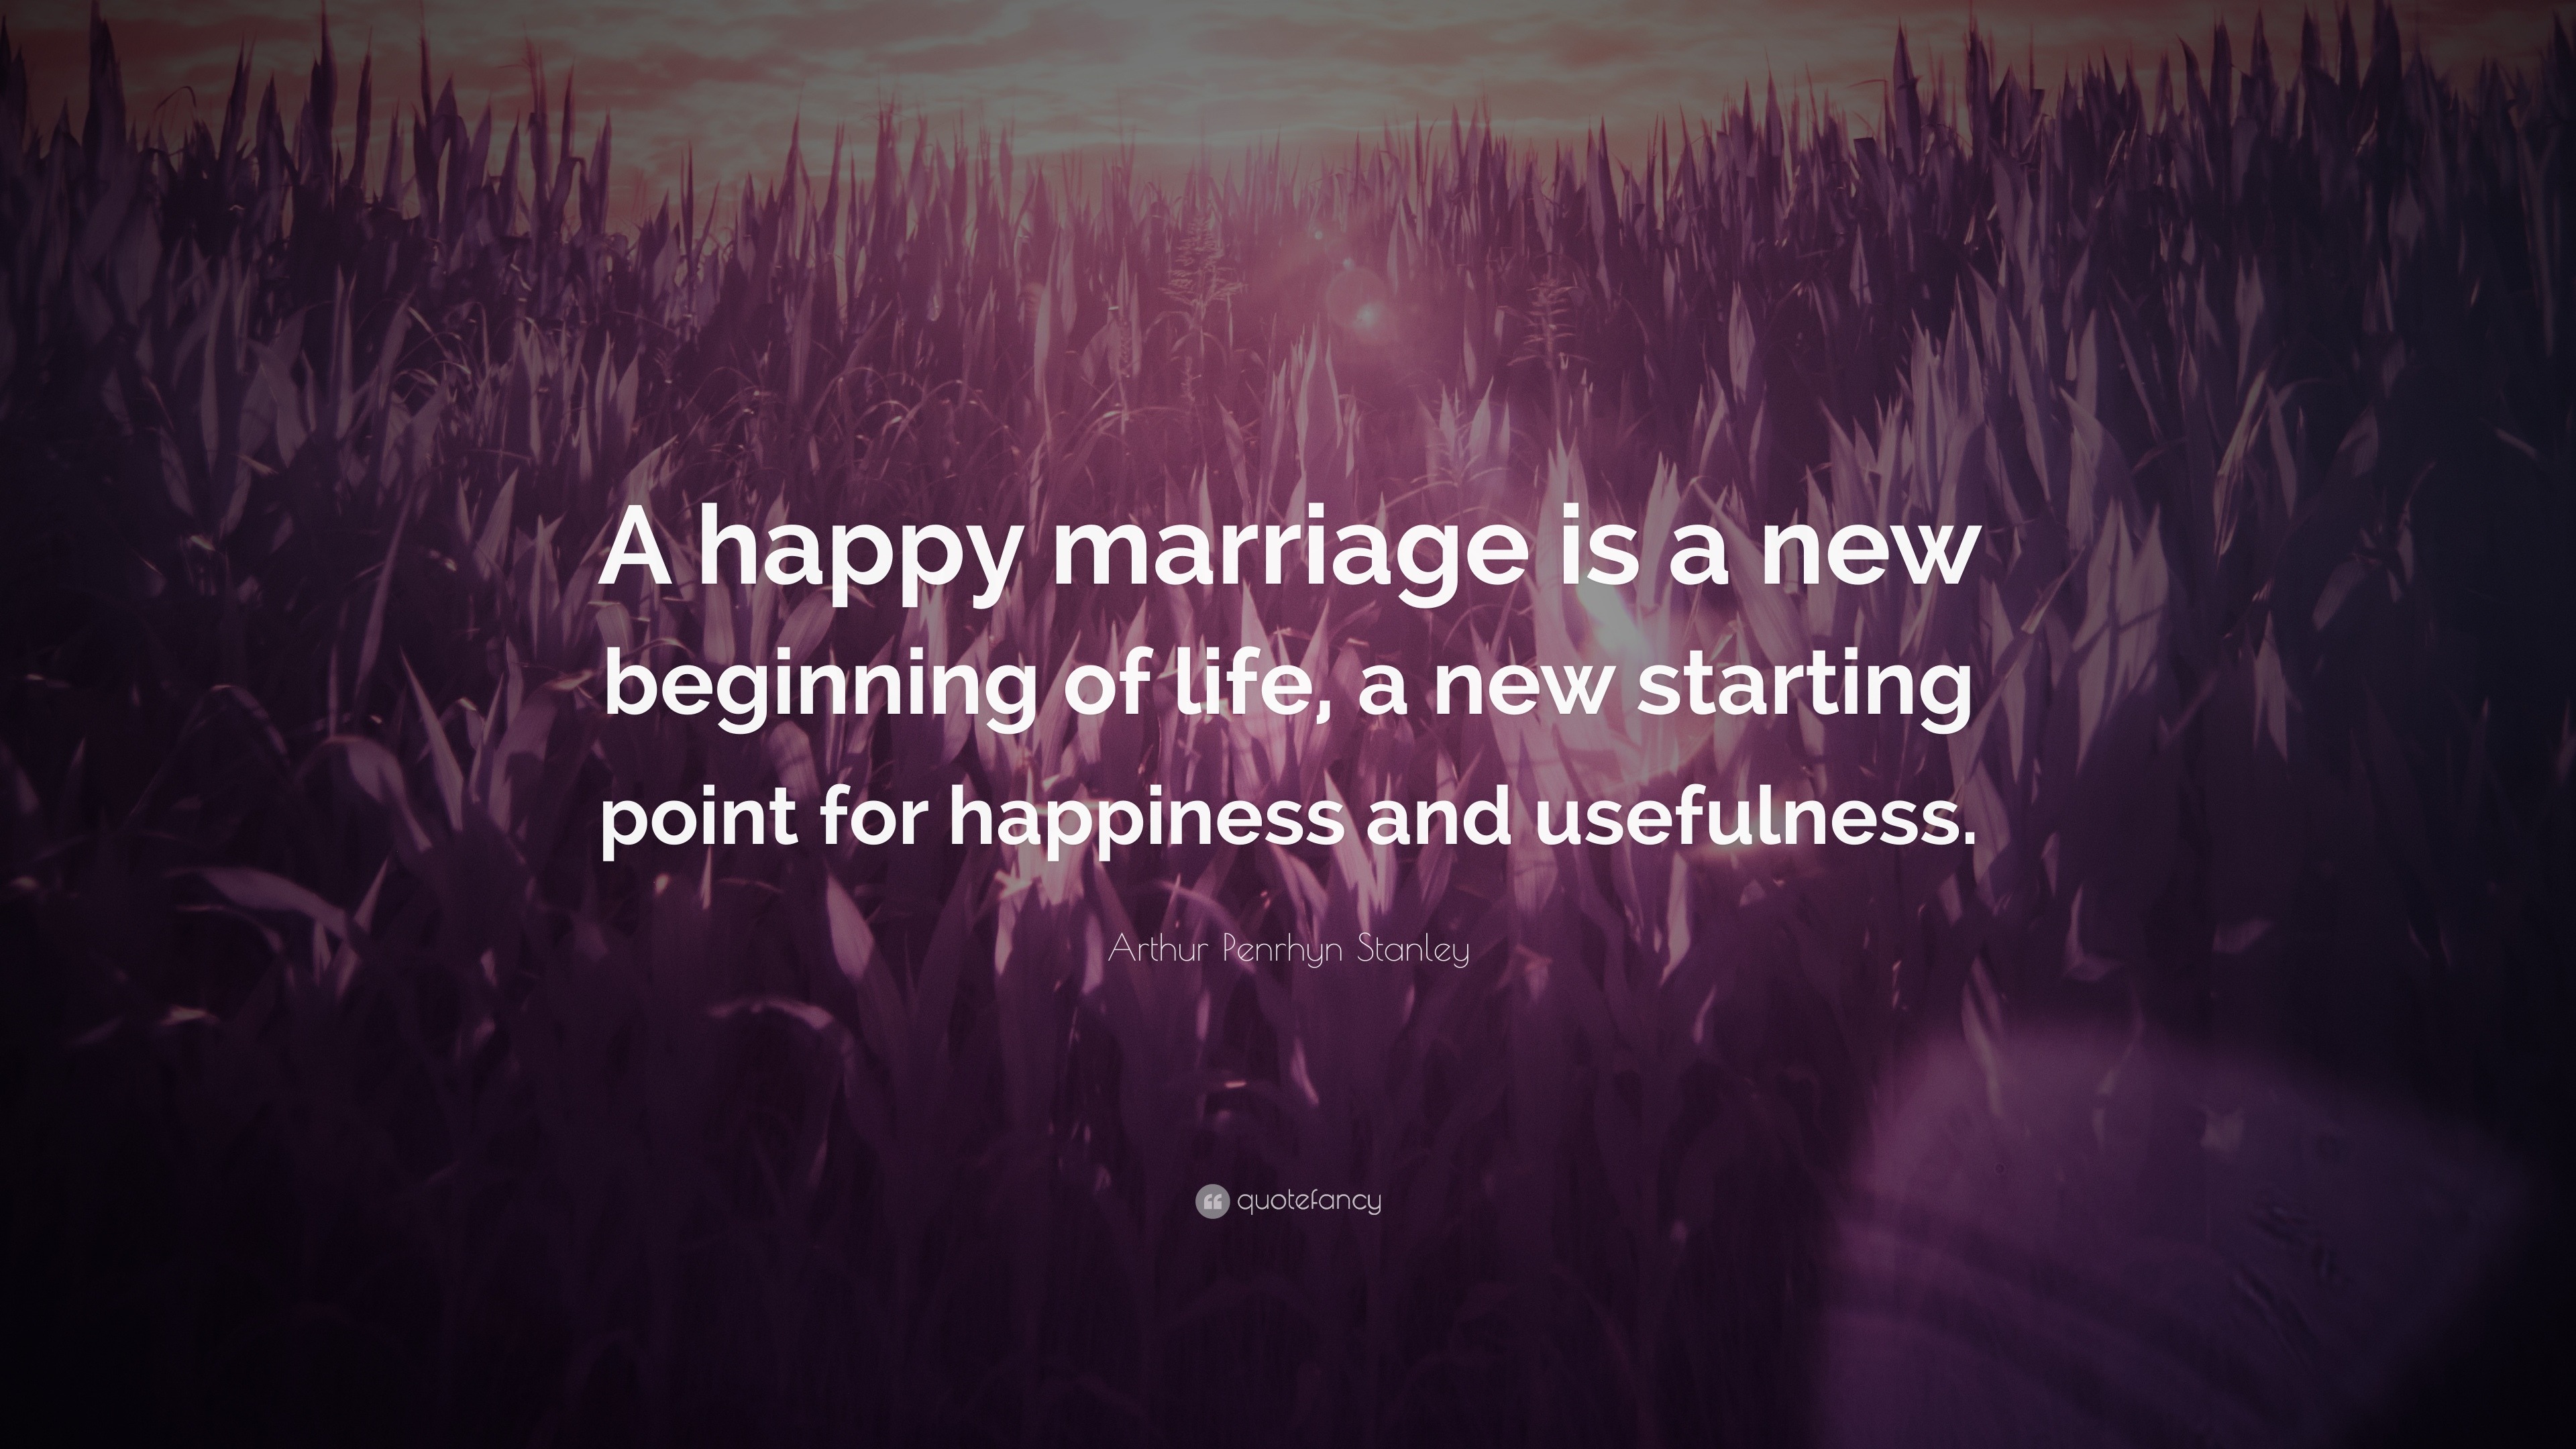 Arthur Penrhyn Stanley Quote “A happy marriage is a new beginning of life